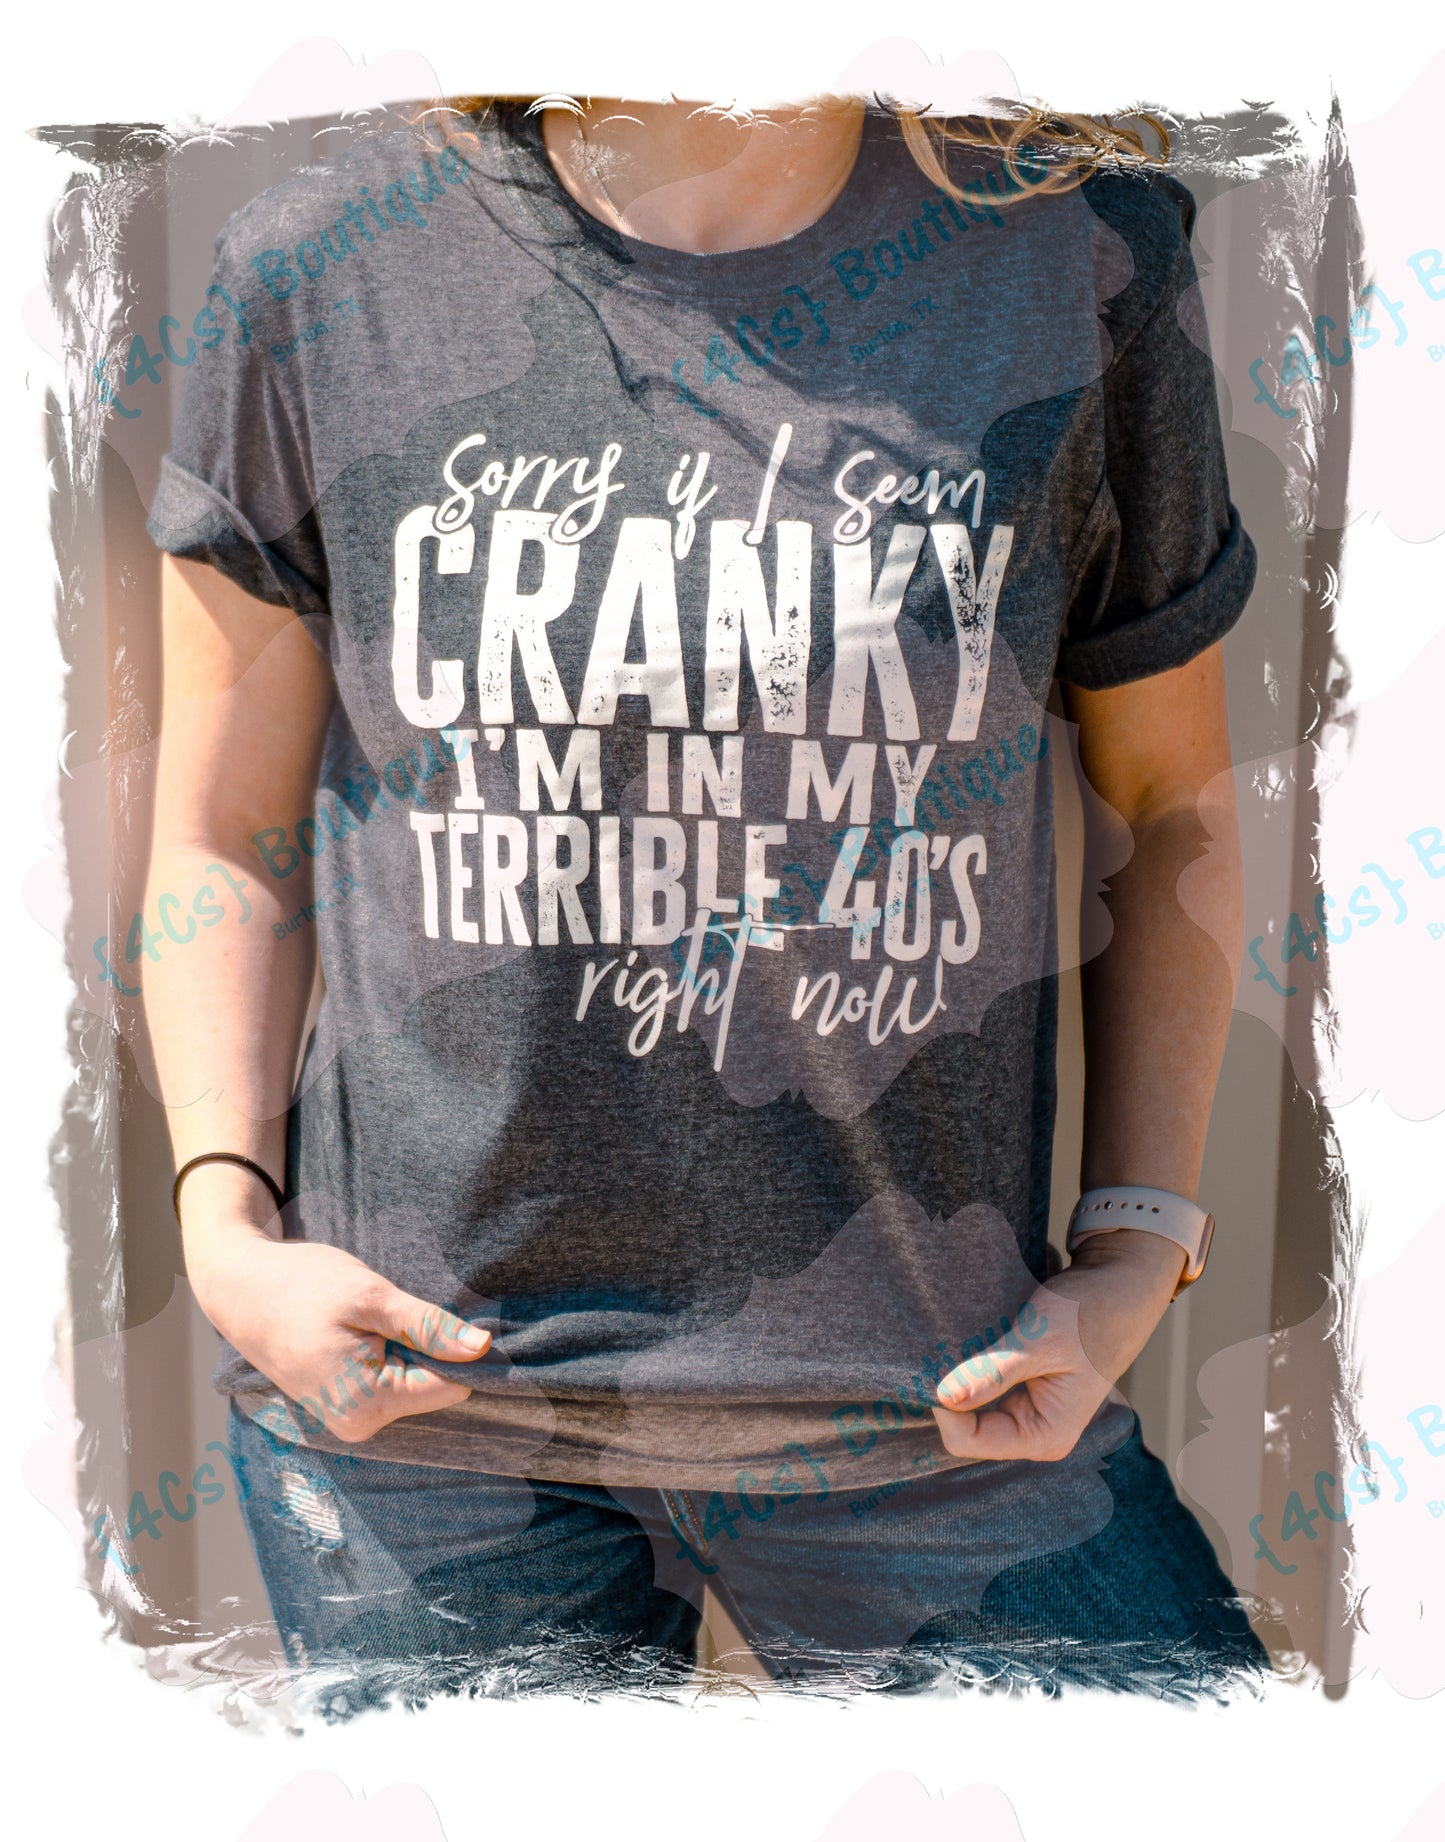 Sorry If I Seem Cranky I'm In My Terrible 40s Right Now Shirt | 4Cs Boutique